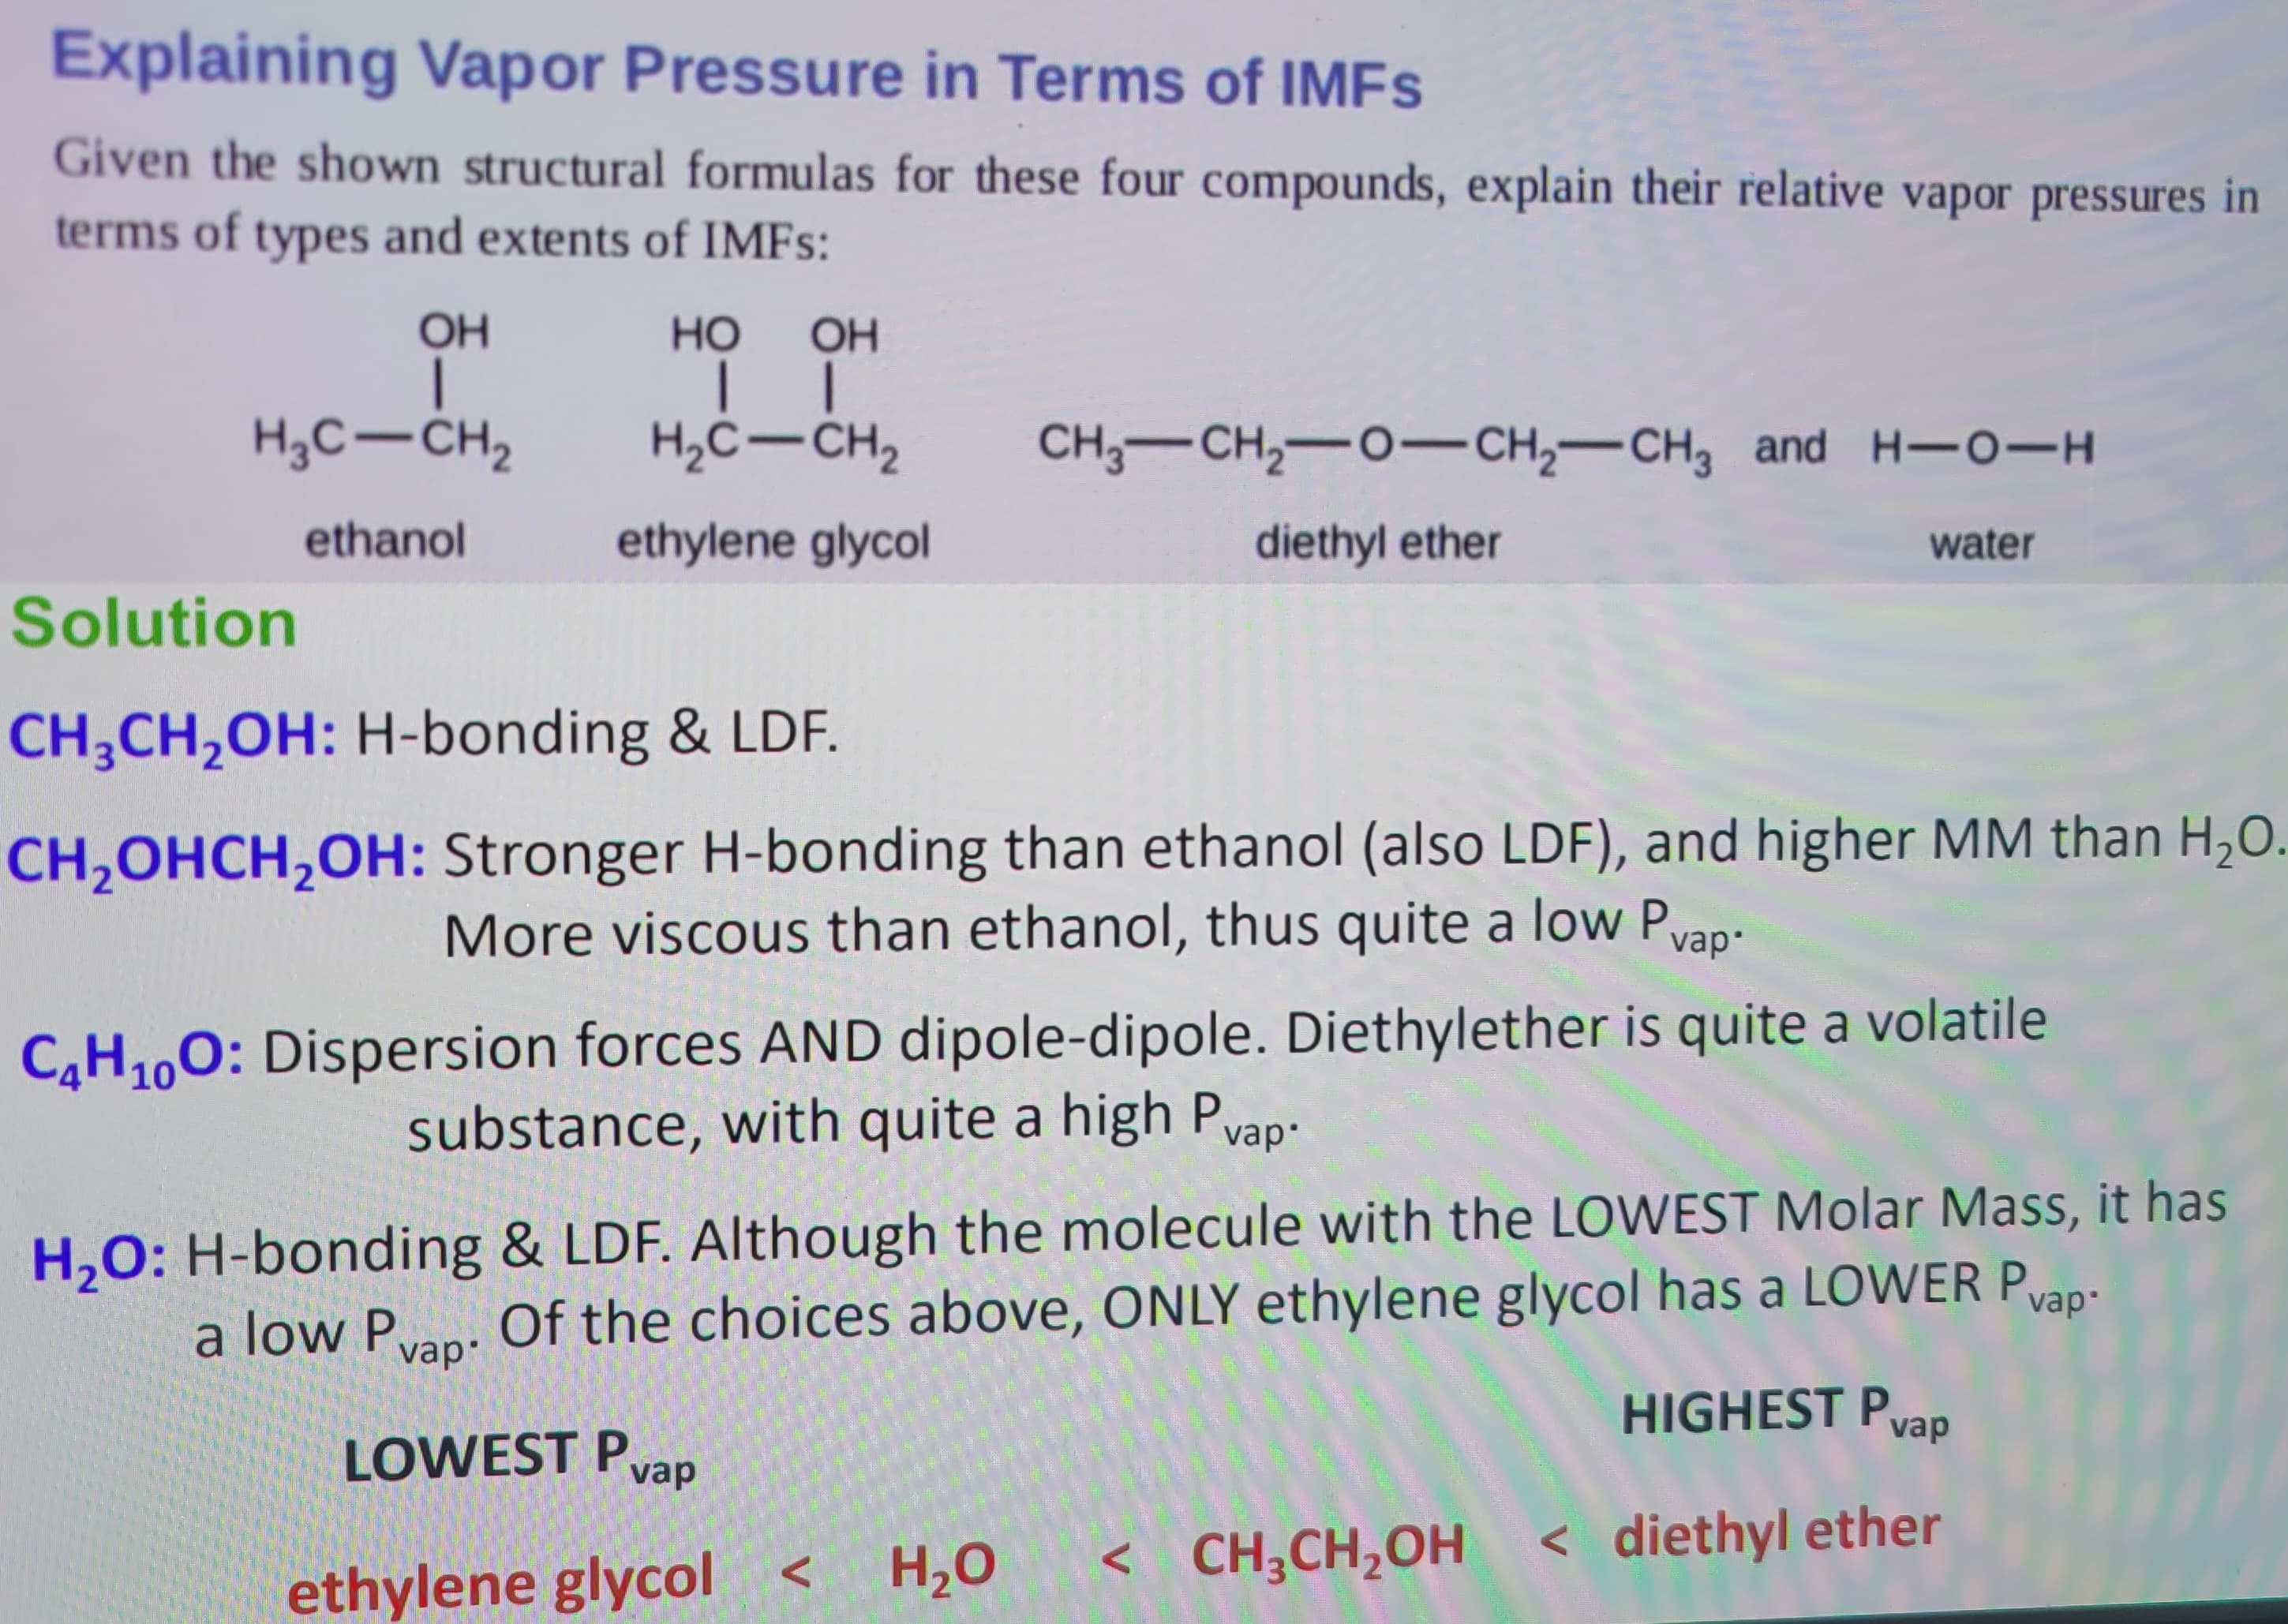 Explaining Vapor Pressure in Terms of IMFs
Given the shown structural formulas for these four compounds, explain their relative vapor pressures in
terms of types and extents of IMFs:
OH
I
H₂C-CH₂
ethanol
HO
OH
| |
H₂C-CH₂
ethylene glycol
Solution
CH₂CH₂OH: H-bonding & LDF.
CH₂OHCH₂OH: Stronger H-bonding than ethanol (also LDF), and higher MM than H₂O.
More viscous than ethanol, thus quite a low P
vap.
CH3-CH₂-0-CH₂ CH3 and H-O-H
diethyl ether
water
C4H₁0O: Dispersion forces AND dipole-dipole. Diethylether is quite a volatile
substance, with quite a high Pvap:
vap•
H₂O: H-bonding & LDF. Although the molecule with the LOWEST Molar Mass, it has
Of the choices above, ONLY ethylene glycol has a LOWER Pvap-
a low Pvap.
LOWEST Pvap
HIGHEST Pvap
<diethyl ether
ethylene glycol <
H₂O
< CH₂CH₂OH